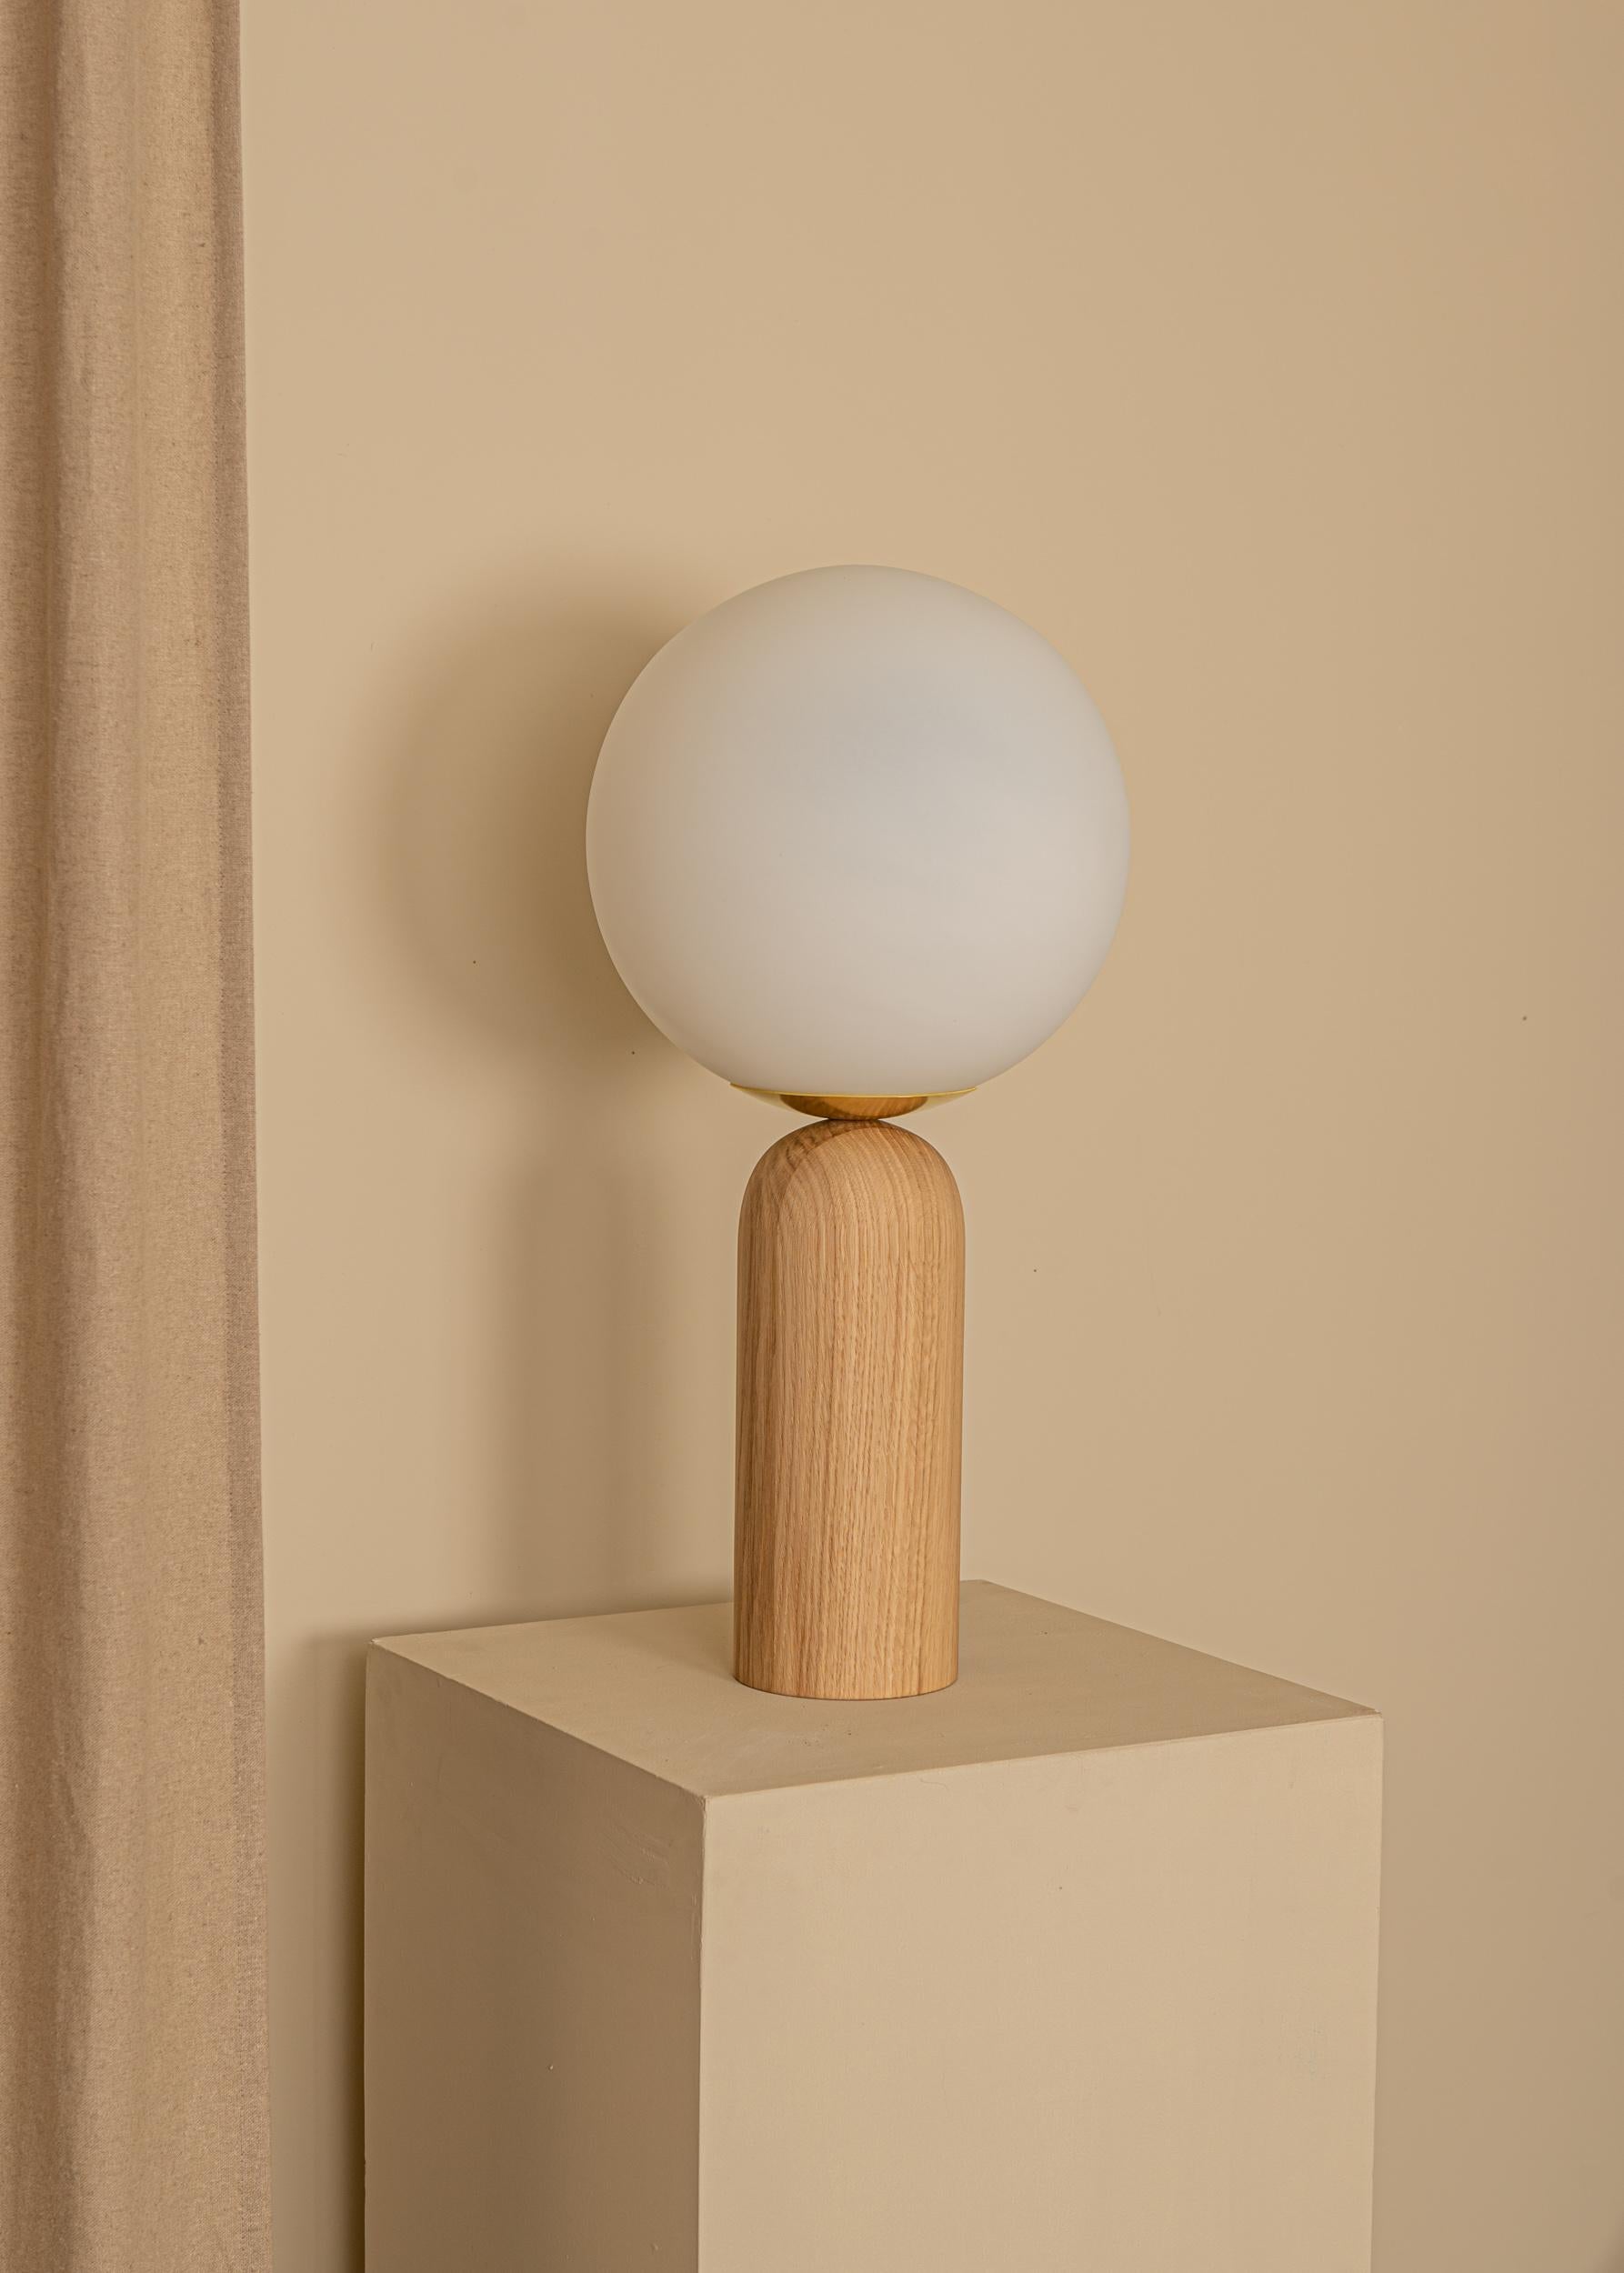 Oak and Brass Atlas Table Lamp by Simone & Marcel
Dimensions: Ø 30 x H 60 cm.
Materials: Glass, brass and oak.

Also available in different marble, wood and alabaster options and finishes. Custom options available on request. Please contact us.